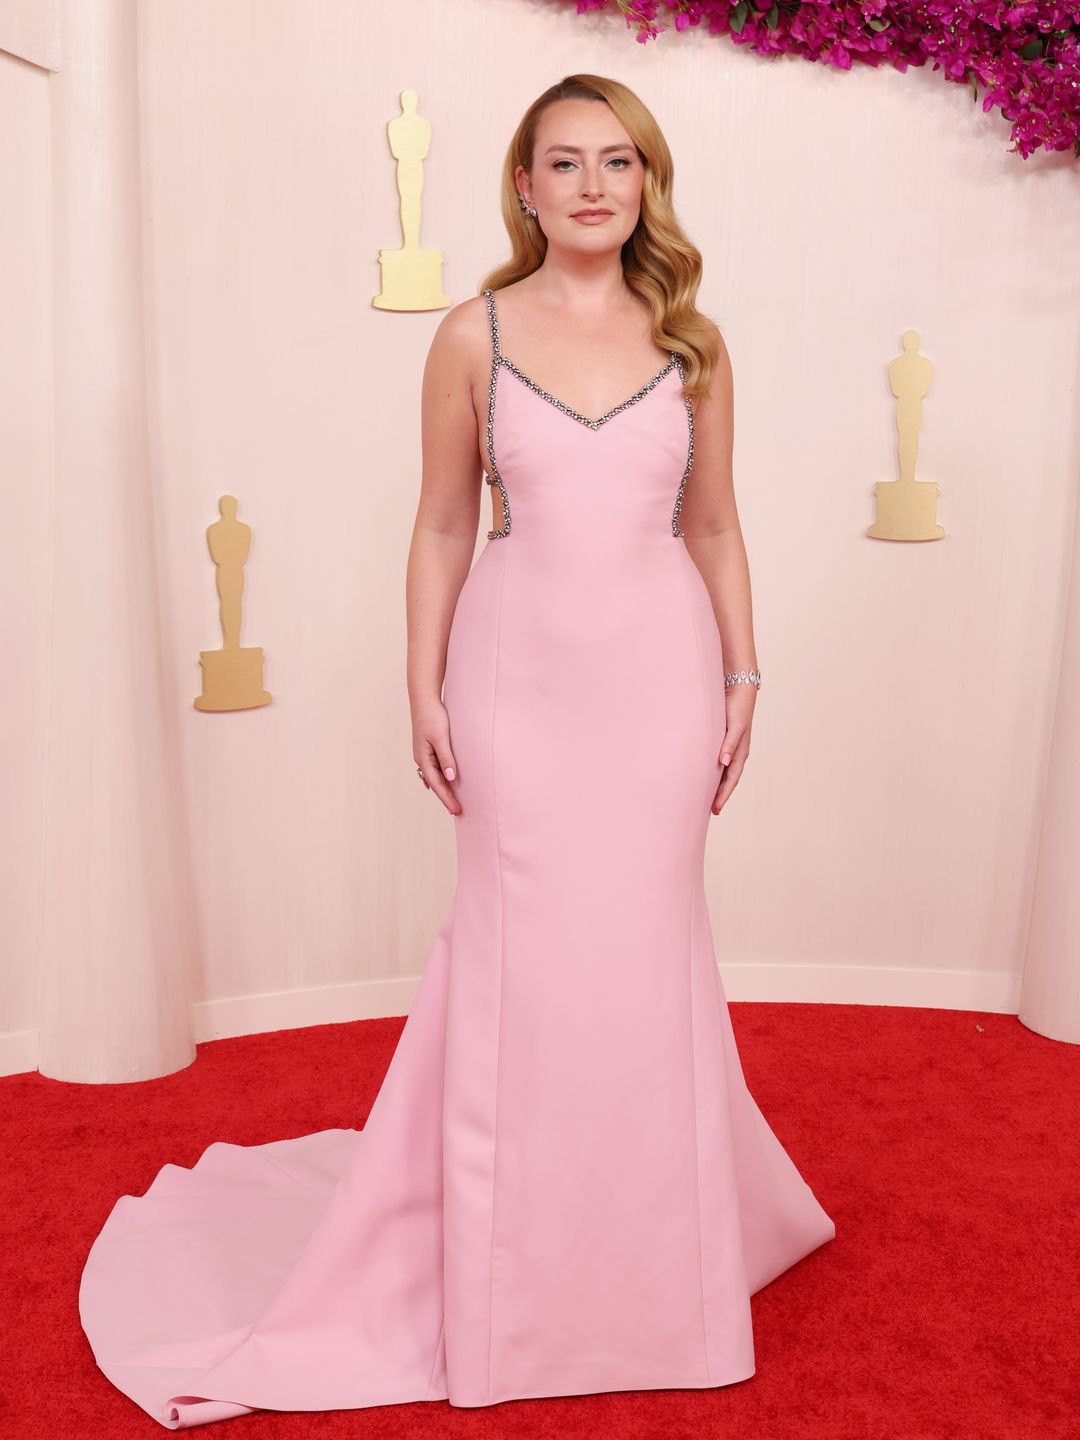 Amelia Dimoldenberg attends the 96th Annual Academy Awards in a pink gown